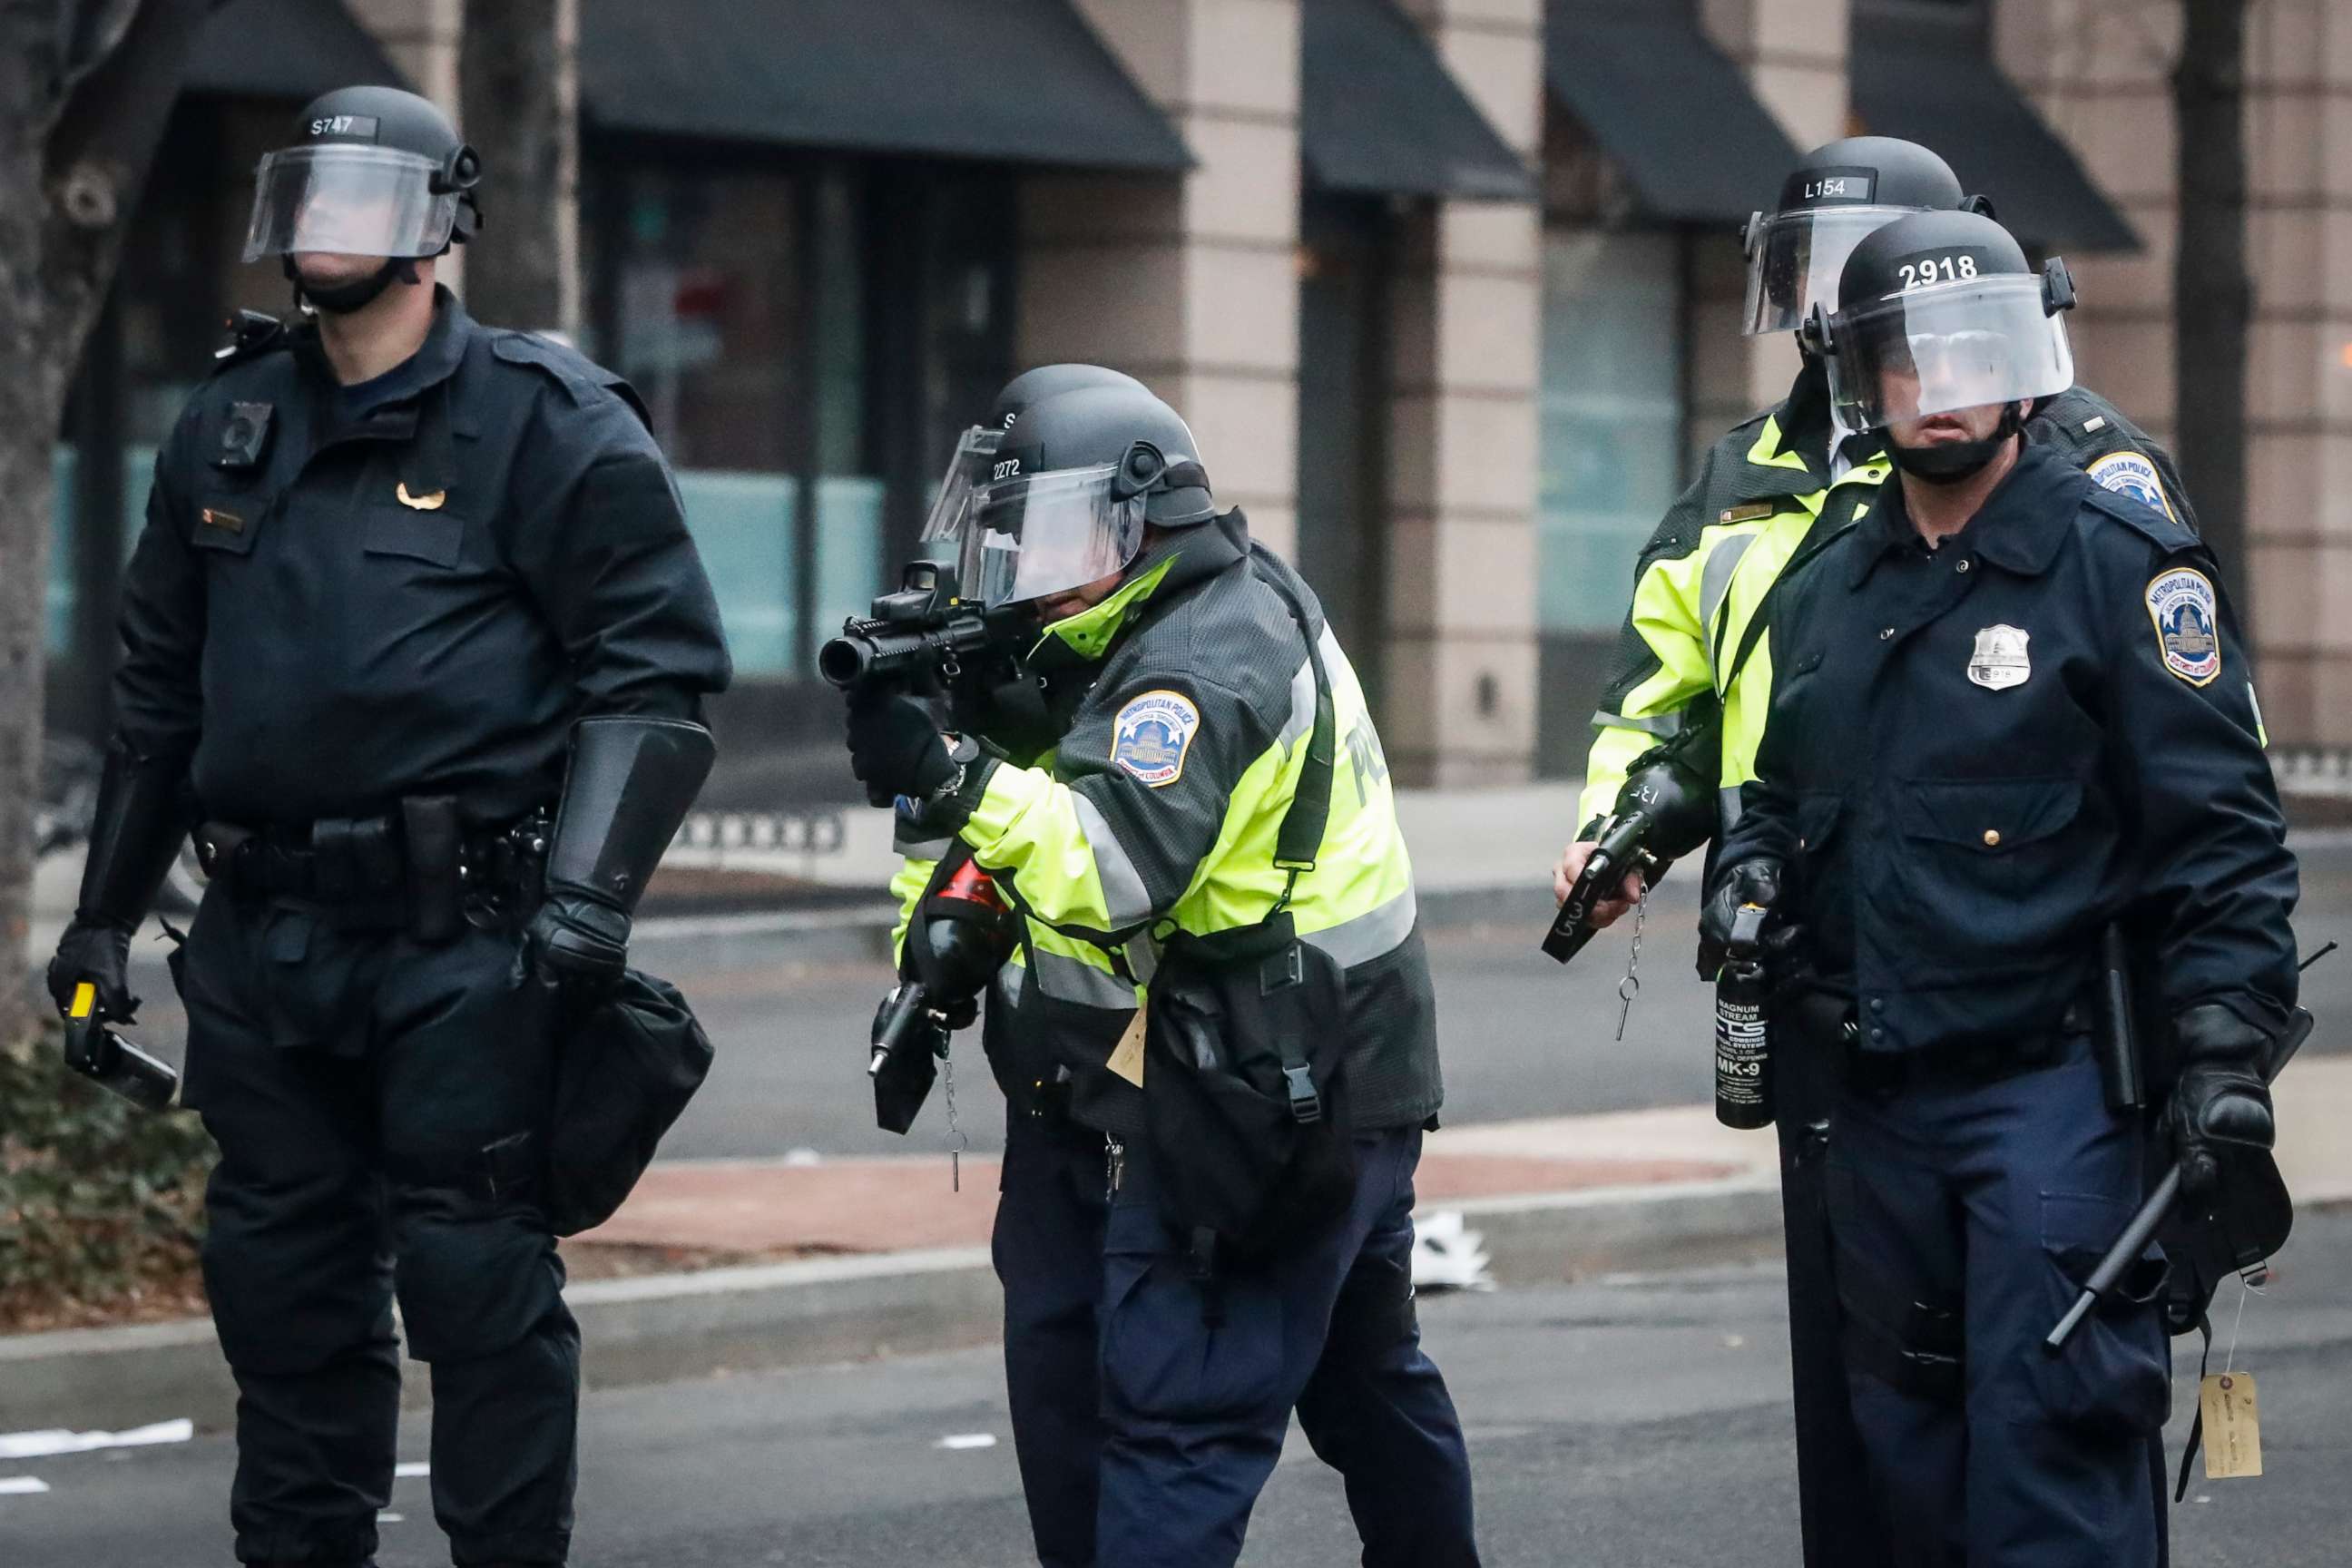 PHOTO: A police officer prepares to fire a 'non-lethal' weapon at protesters during a demonstration after the inauguration of President Donald Trump, Jan. 20, 2017, in Washington, D.C.